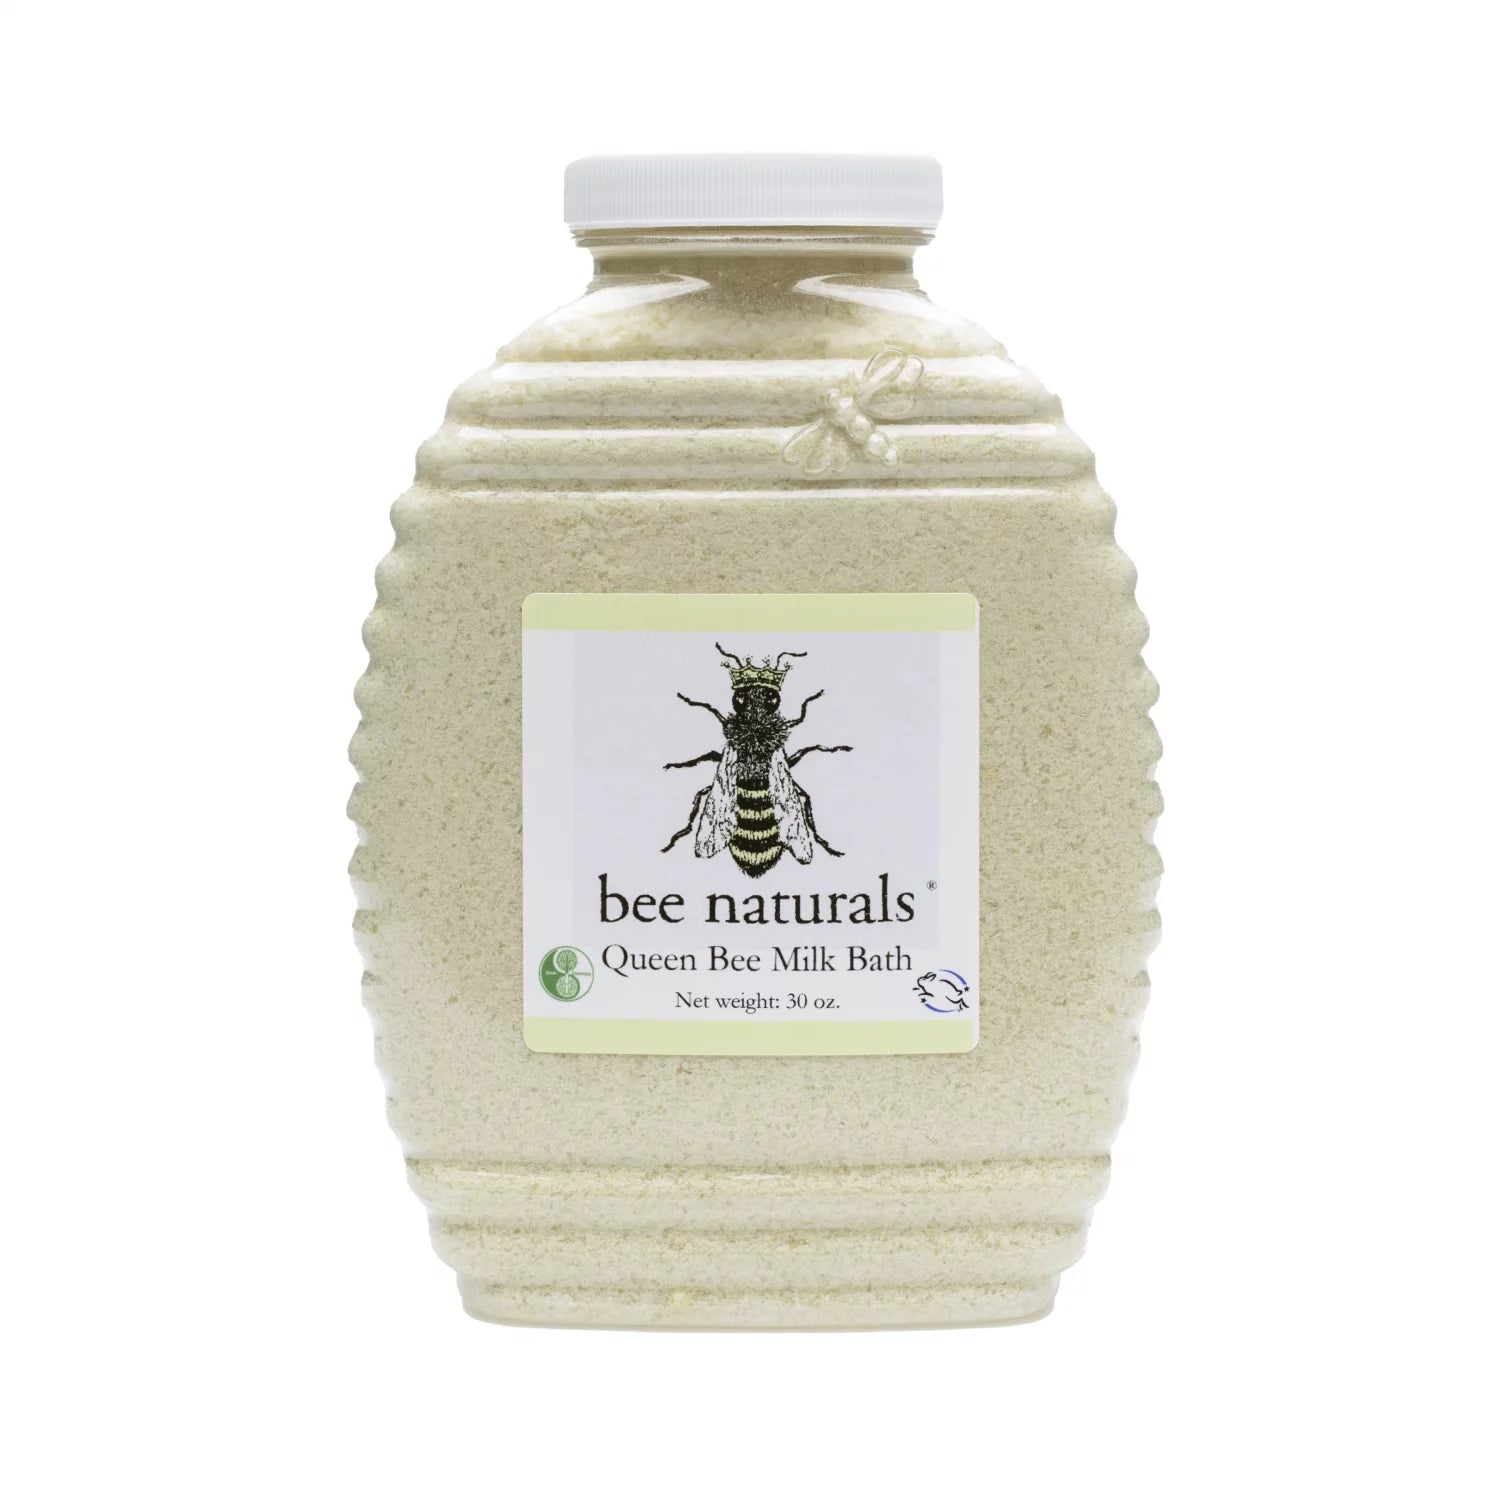 Queen Bee Milk Bath Available in 10 oz and 30 oz size - Bee Naturals Store